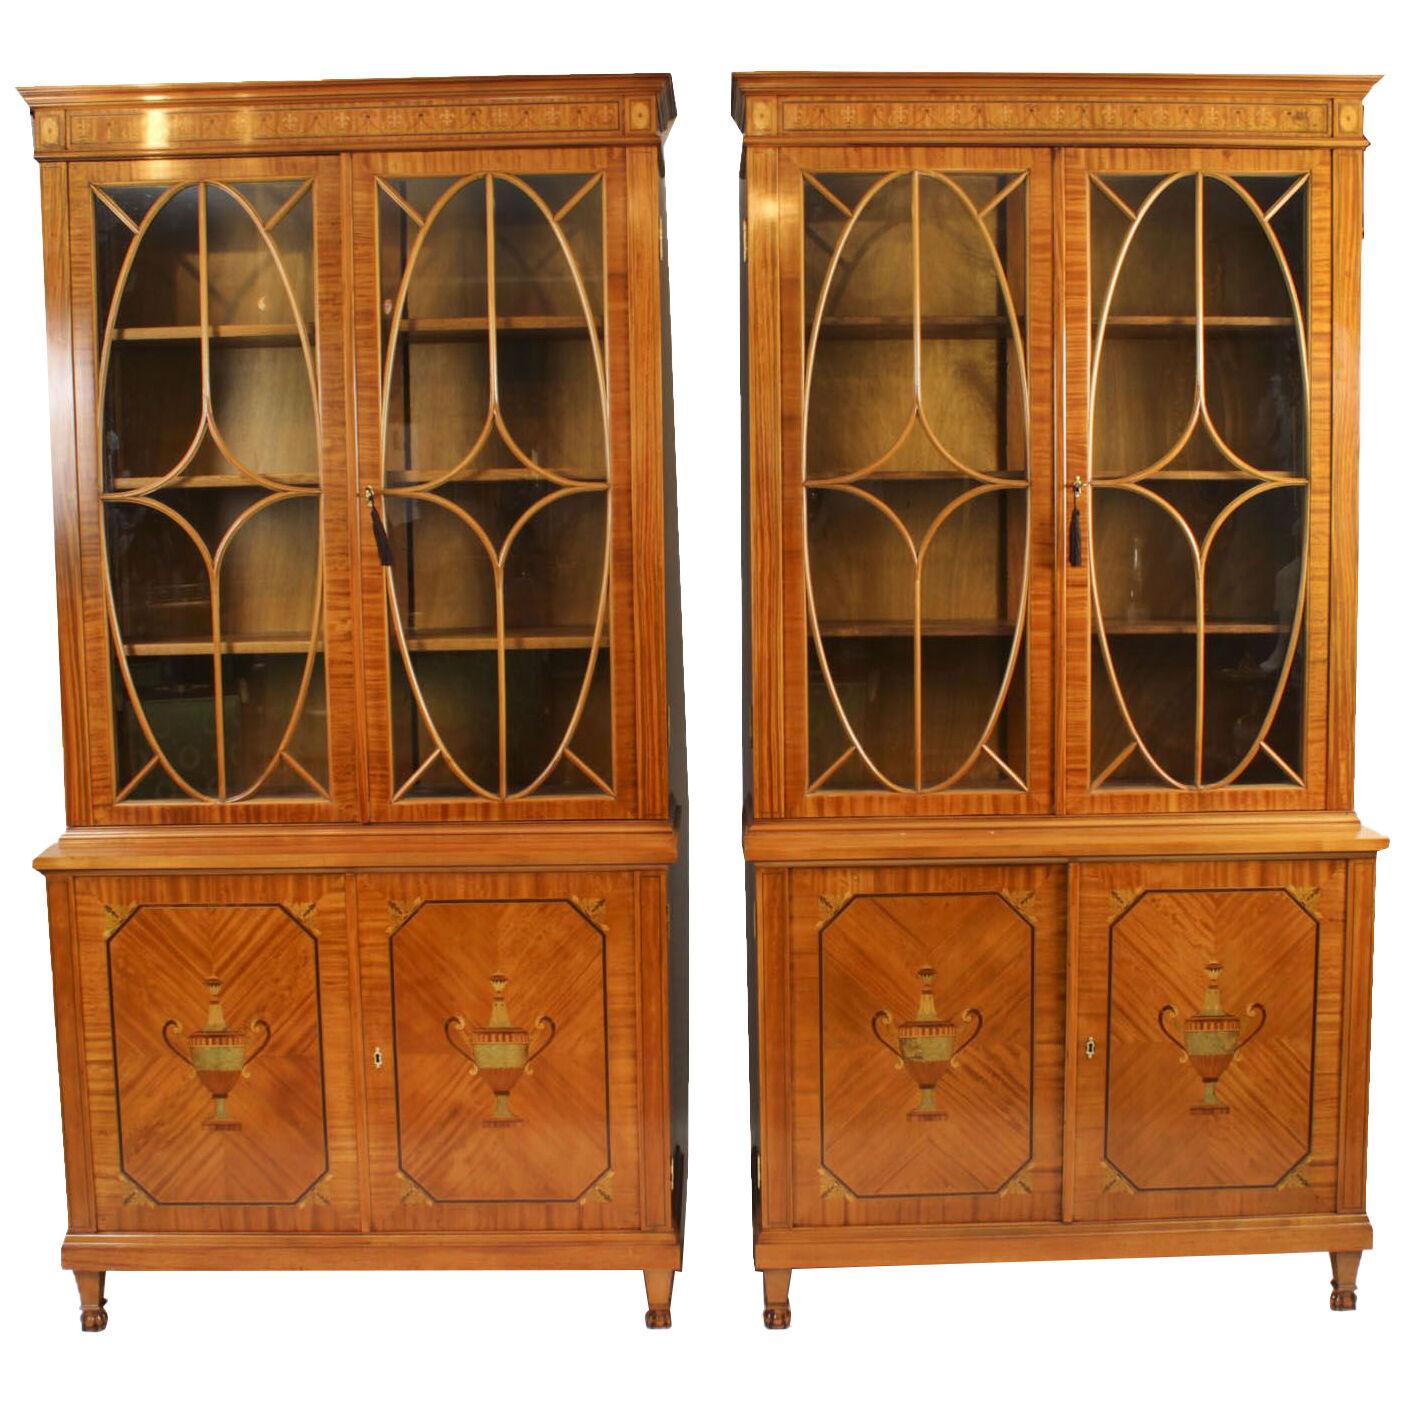 Antique Pair Edwardian Inlaid Satinwood Bookcases by Maple & Co C1900